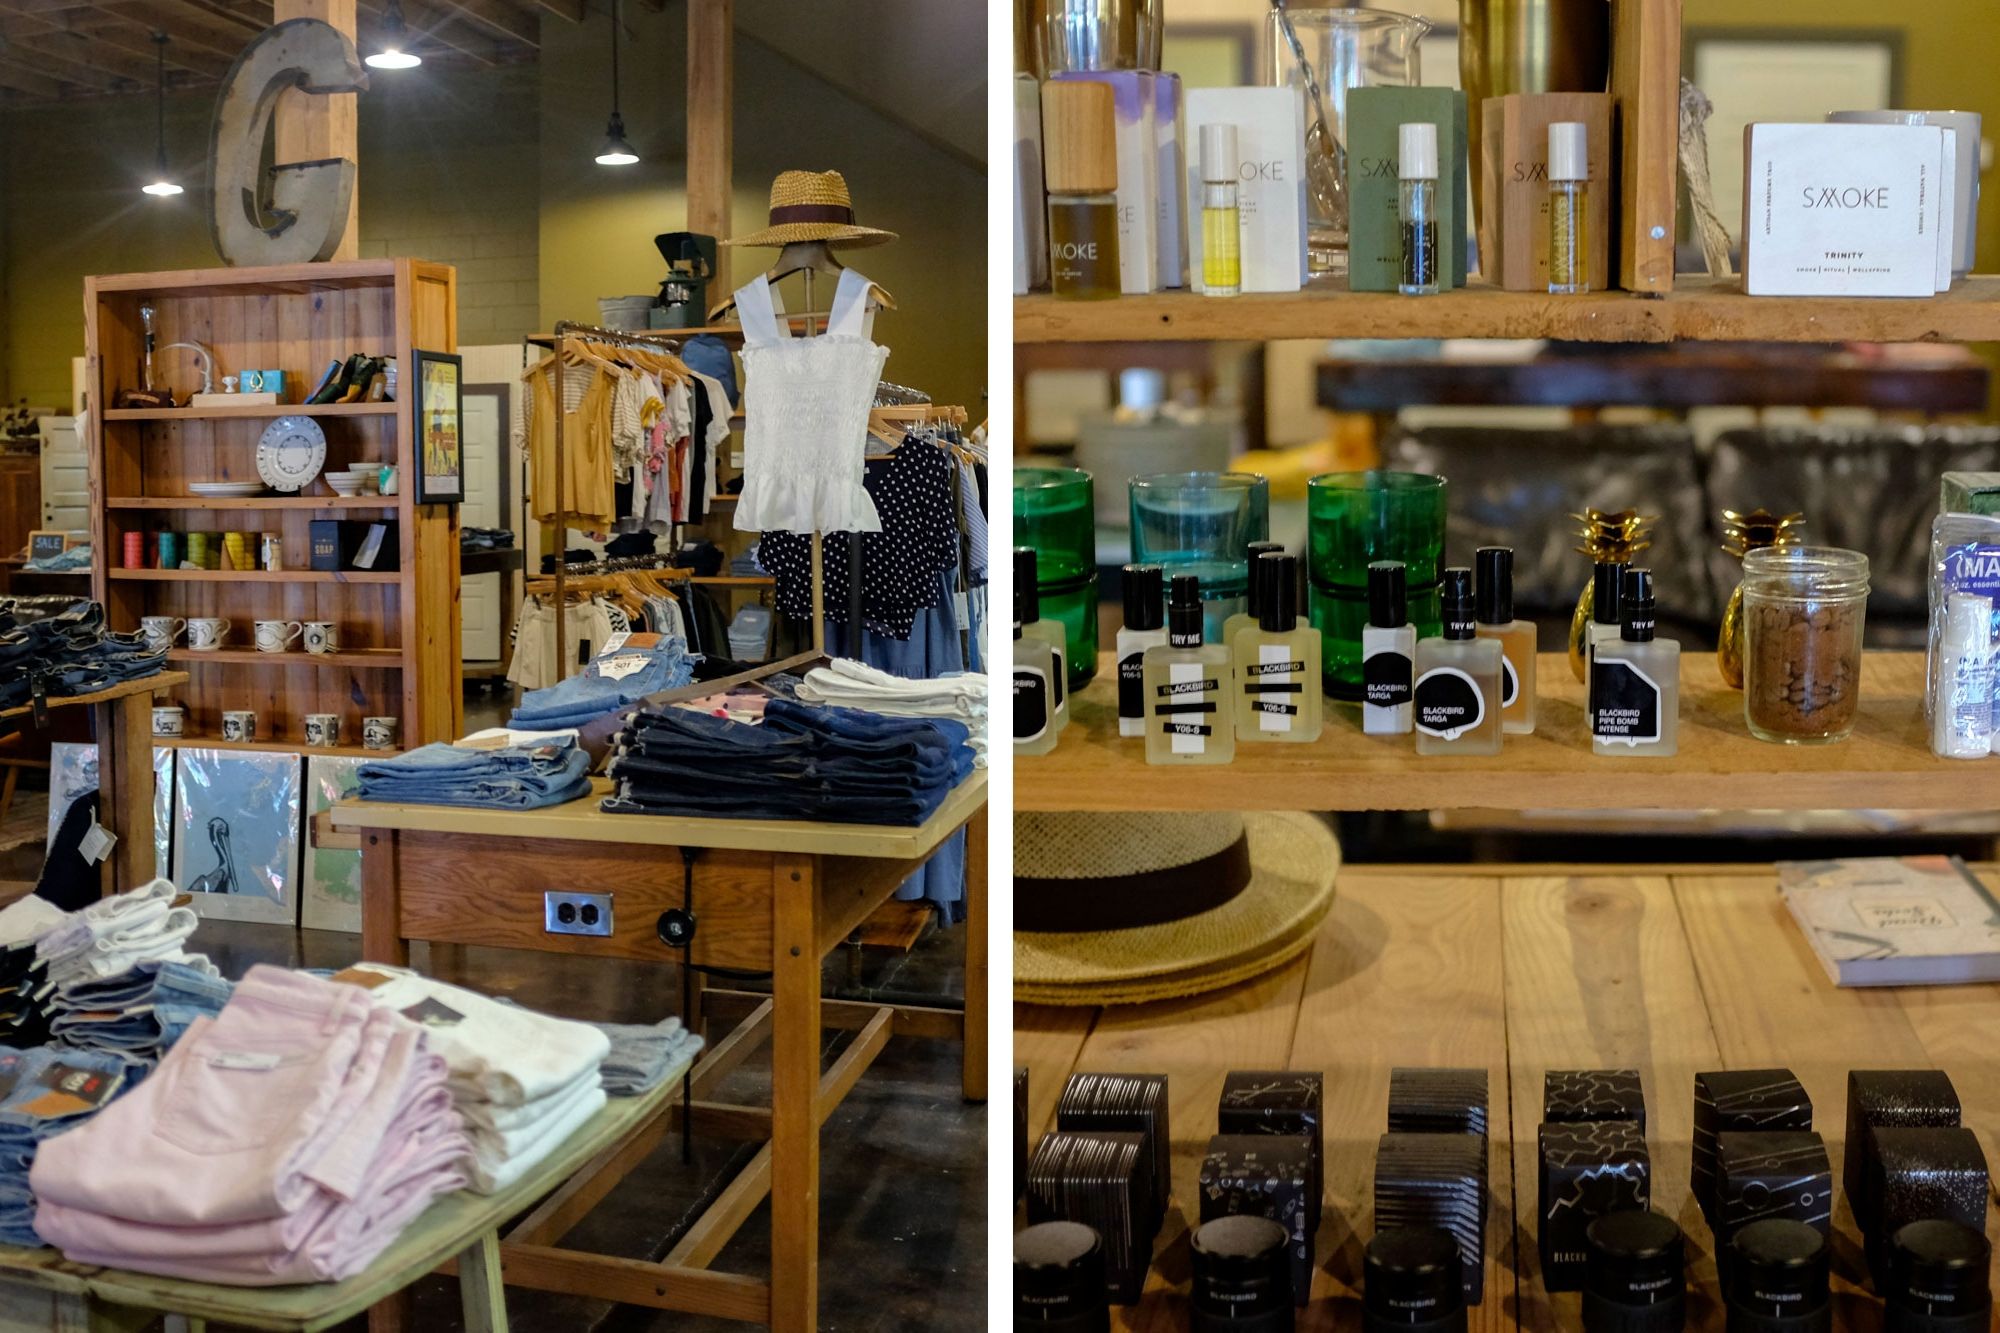 Collage of the interior of the store: clothing and beauty products